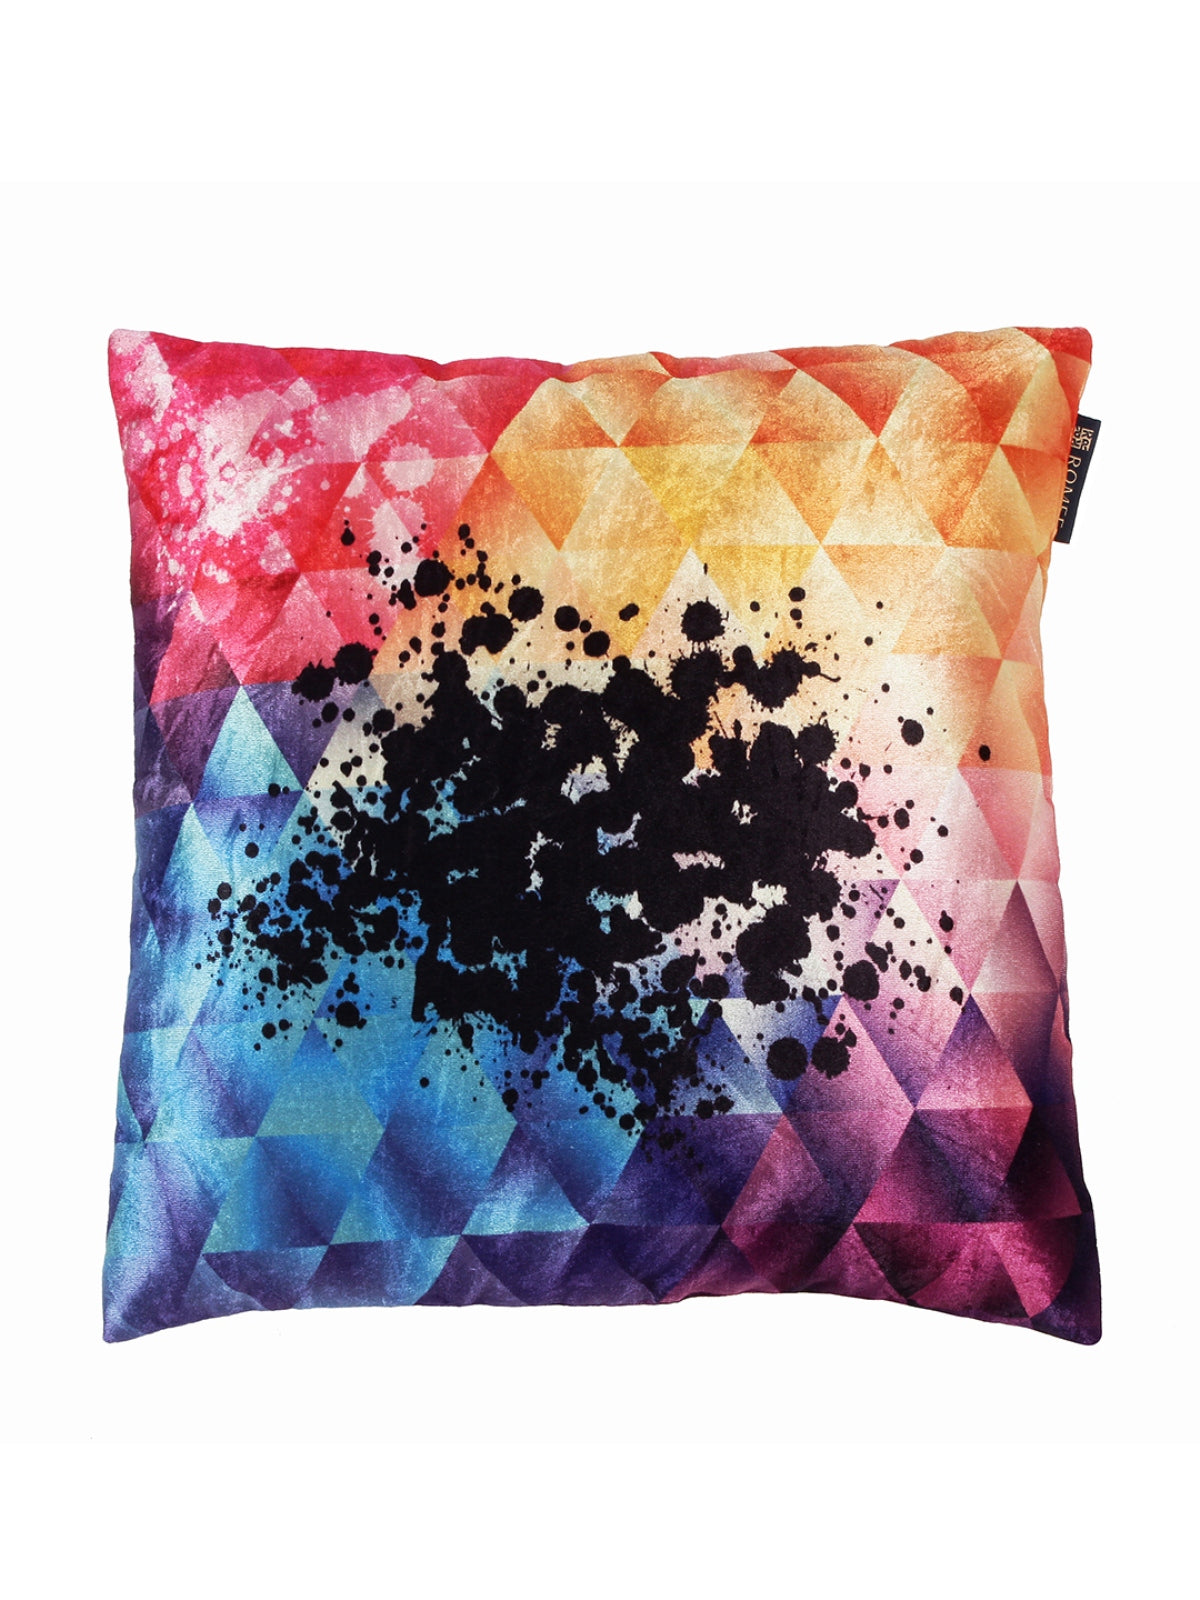 Printed Abstract 5 Piece Velvet Cushion Cover Set - 16" x 16", Multicolour